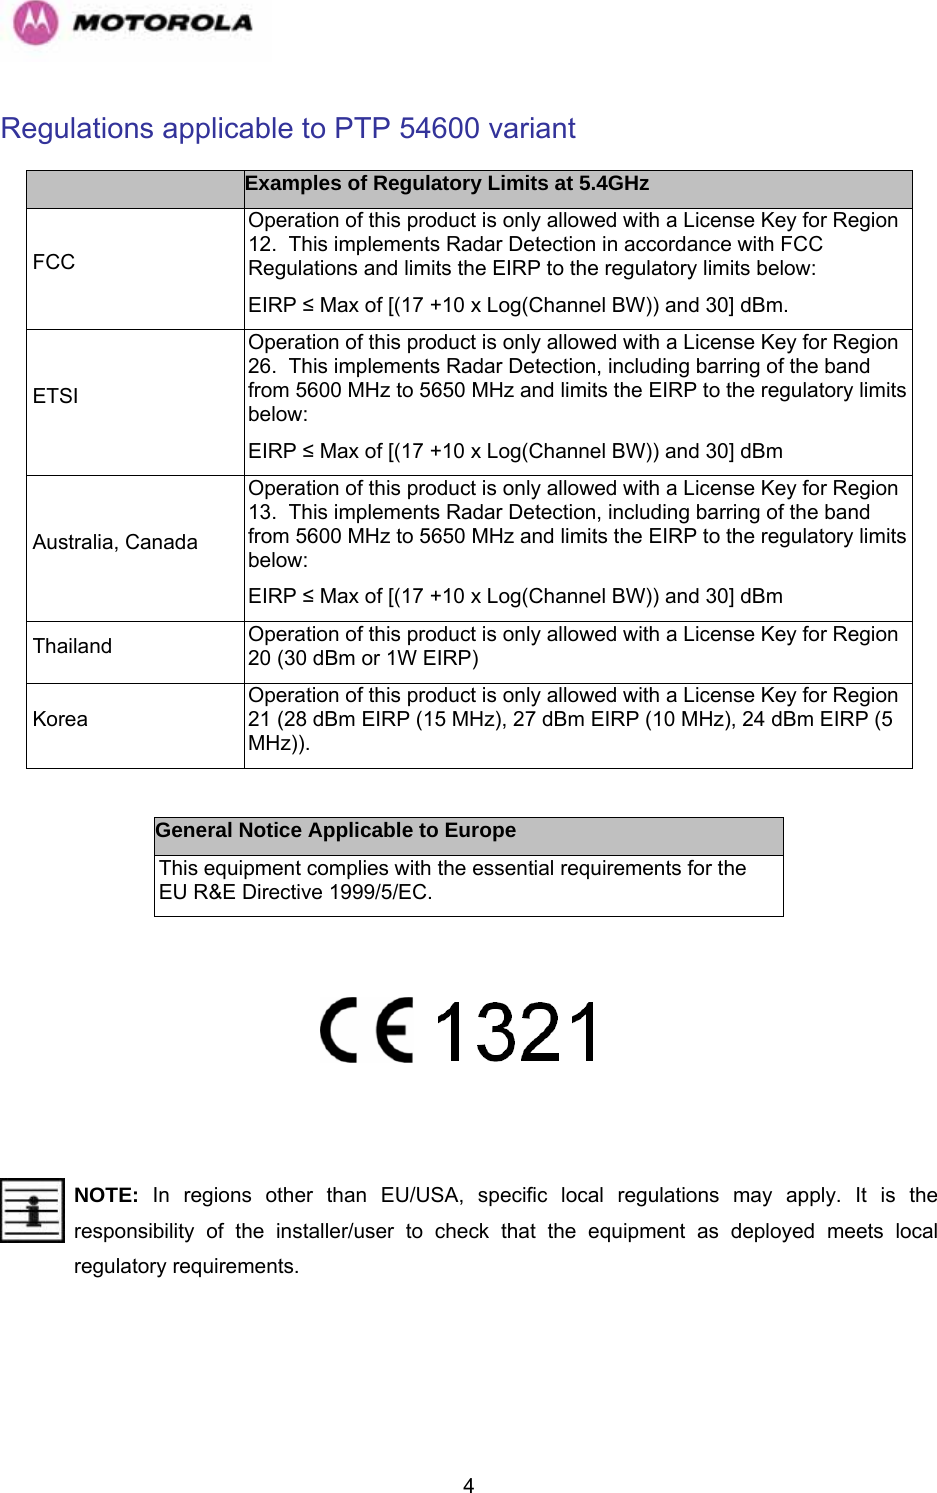   4Regulations applicable to PTP 54600 variant  Examples of Regulatory Limits at 5.4GHz  FCC Operation of this product is only allowed with a License Key for Region 12.  This implements Radar Detection in accordance with FCC Regulations and limits the EIRP to the regulatory limits below: EIRP ≤ Max of [(17 +10 x Log(Channel BW)) and 30] dBm.  ETSI Operation of this product is only allowed with a License Key for Region 26.  This implements Radar Detection, including barring of the band from 5600 MHz to 5650 MHz and limits the EIRP to the regulatory limits below: EIRP ≤ Max of [(17 +10 x Log(Channel BW)) and 30] dBm  Australia, Canada Operation of this product is only allowed with a License Key for Region 13.  This implements Radar Detection, including barring of the band from 5600 MHz to 5650 MHz and limits the EIRP to the regulatory limits below: EIRP ≤ Max of [(17 +10 x Log(Channel BW)) and 30] dBm  Thailand  Operation of this product is only allowed with a License Key for Region 20 (30 dBm or 1W EIRP)  Korea Operation of this product is only allowed with a License Key for Region 21 (28 dBm EIRP (15 MHz), 27 dBm EIRP (10 MHz), 24 dBm EIRP (5 MHz)).  General Notice Applicable to Europe This equipment complies with the essential requirements for the EU R&amp;E Directive 1999/5/EC.    NOTE:  In regions other than EU/USA, specific local regulations may apply. It is the responsibility of the installer/user to check that the equipment as deployed meets local regulatory requirements. 